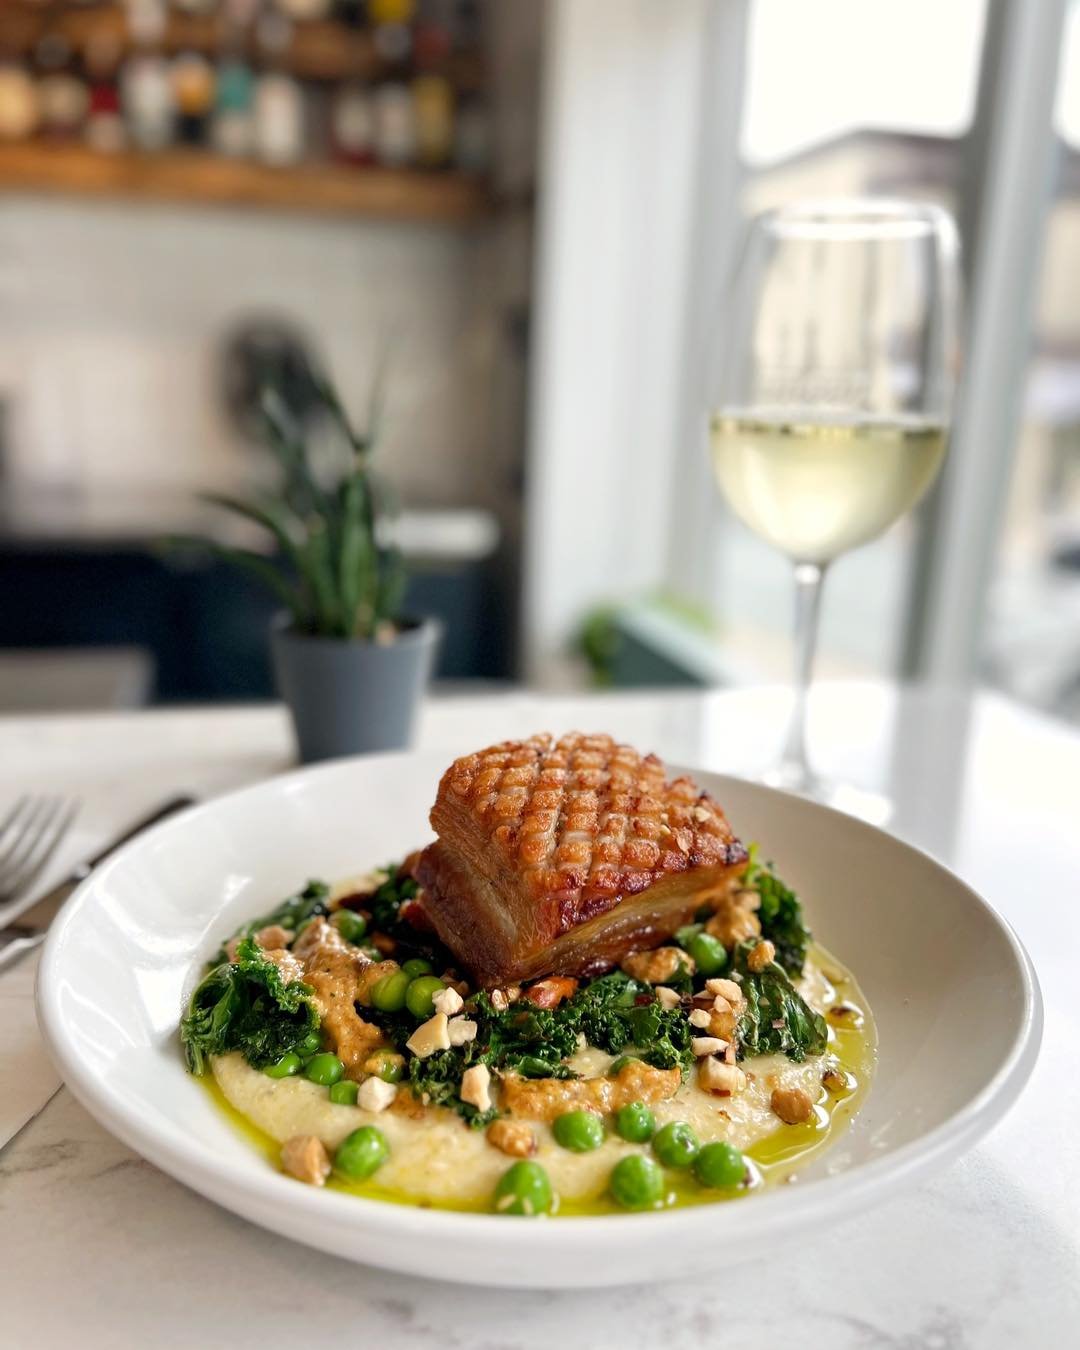 🚨 BEAUTIFUL DISH ALERT 🚨 You don&rsquo;t want to miss out on this weekend&rsquo;s dinner feature &gt;&gt; Crispy Oulton&rsquo;s pork belly, creamy polenta, saut&eacute;ed kale &amp; peas, romesco, toasted almonds. ✅ Checking all the delicious boxes